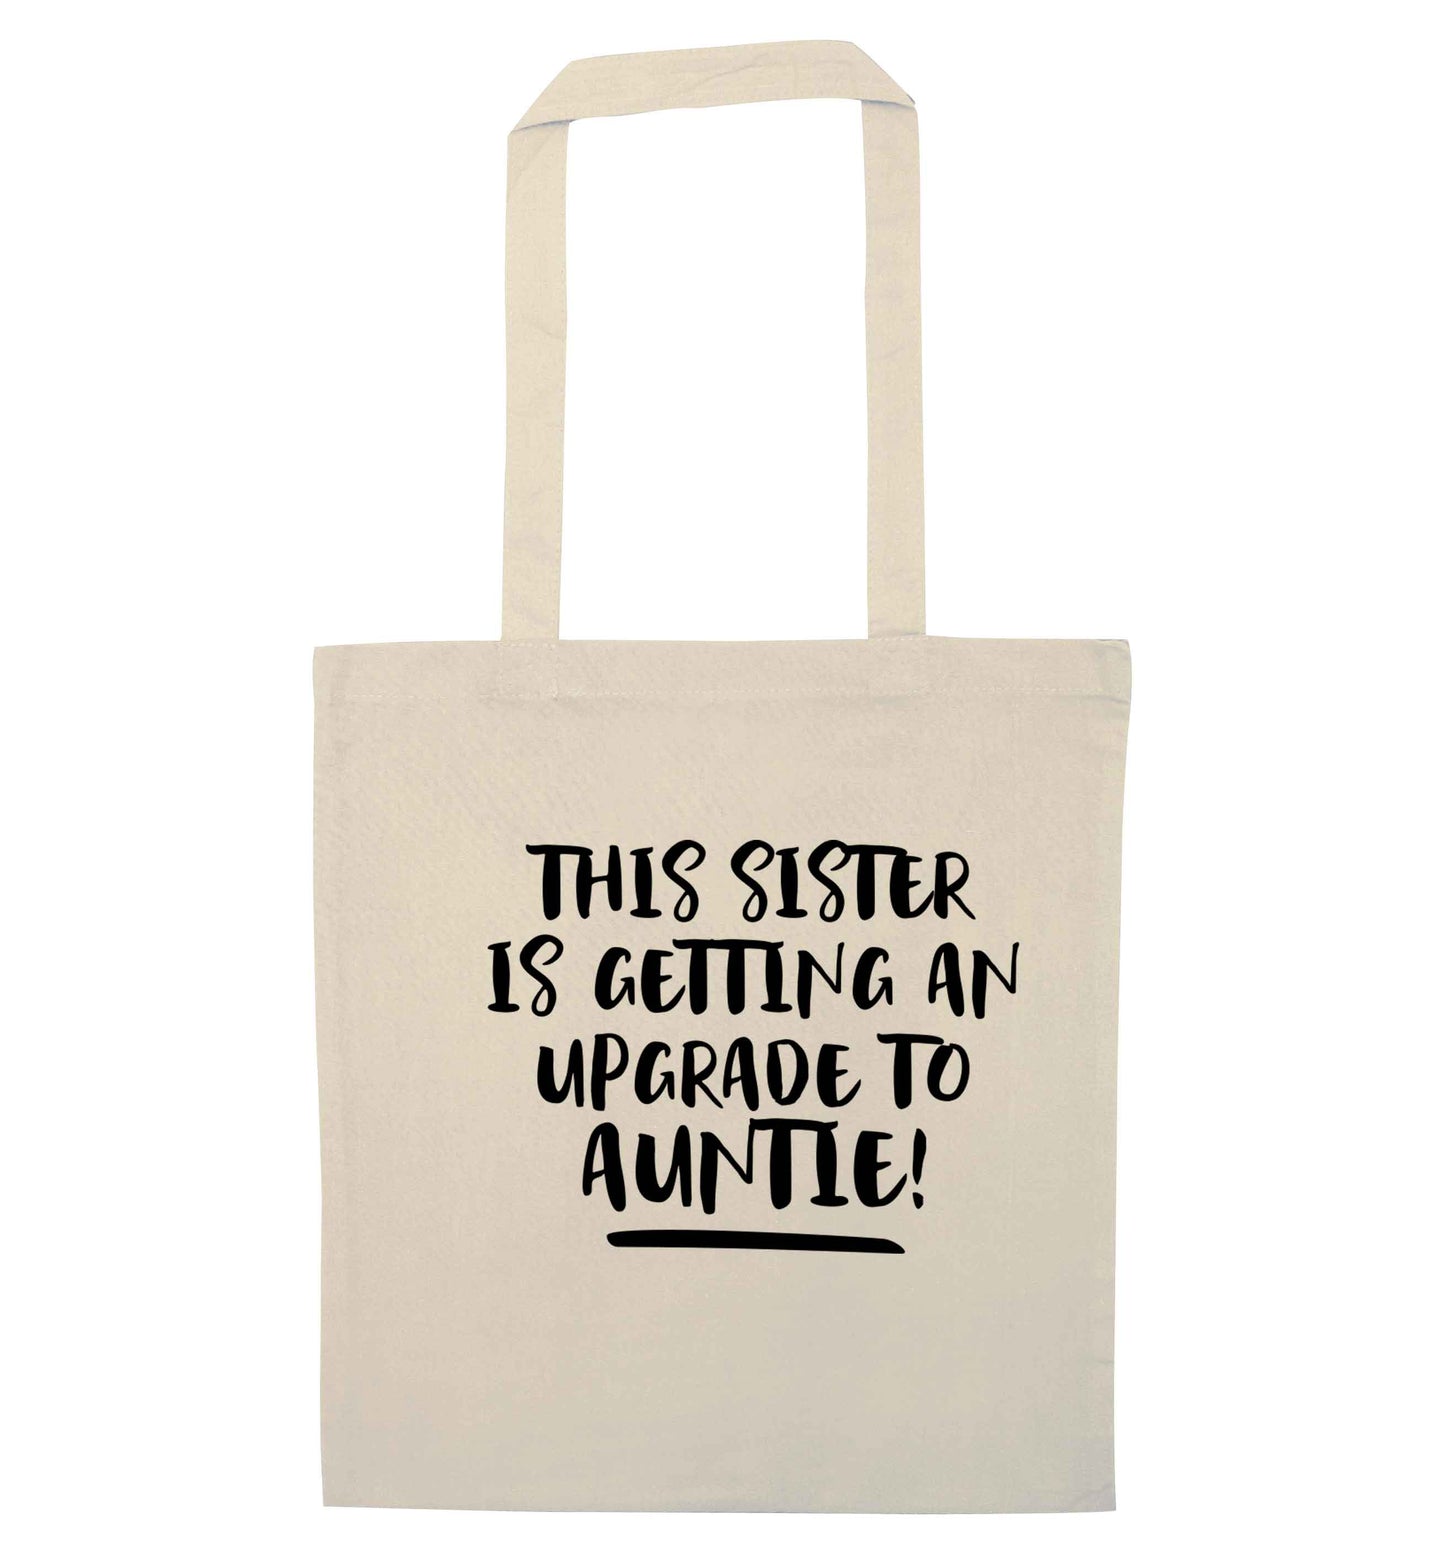 This sister is getting an upgrade to auntie! natural tote bag